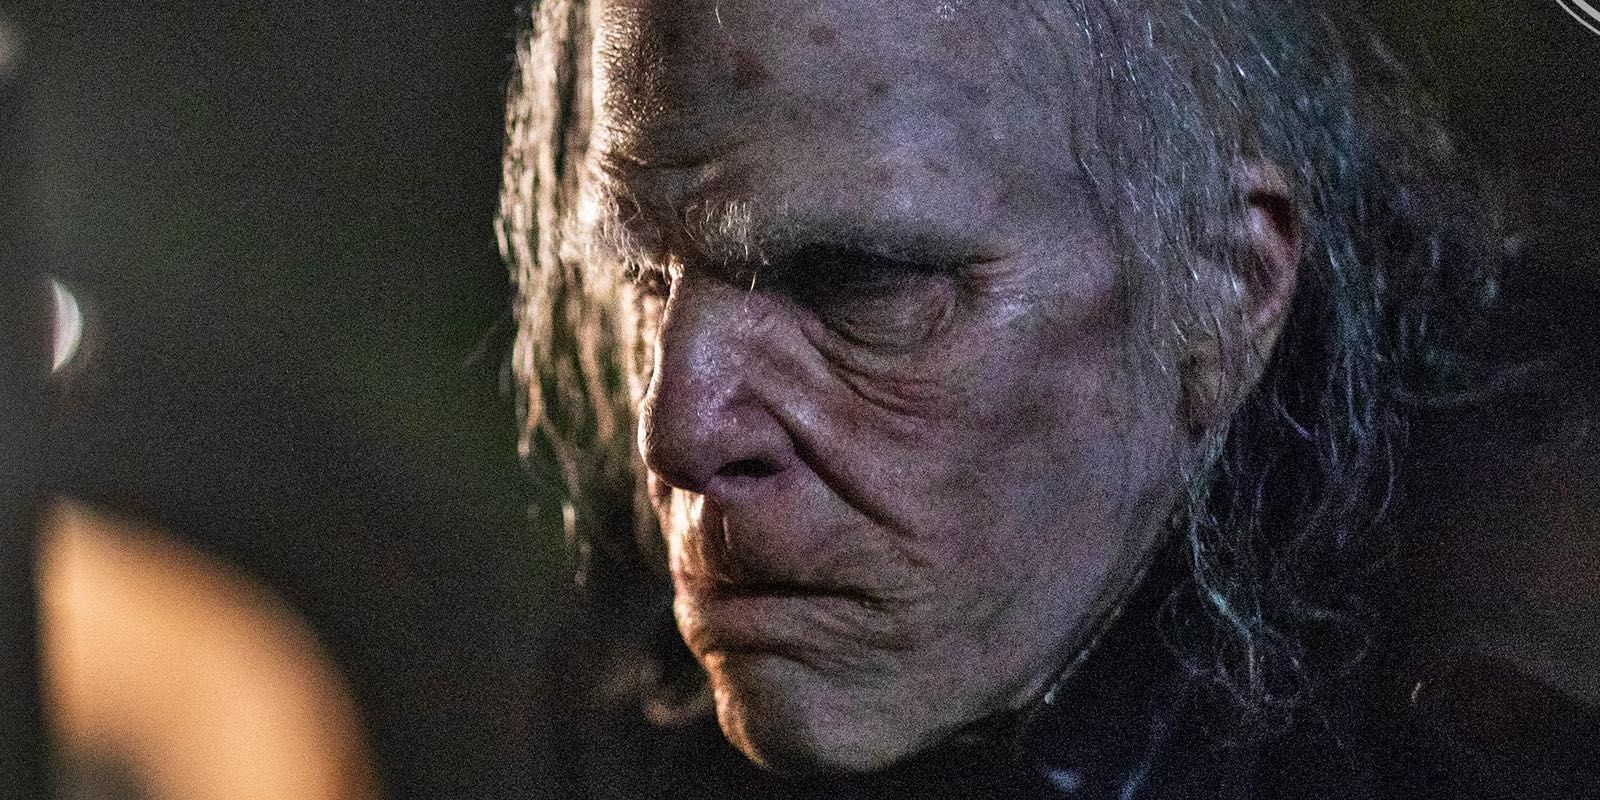 An aged Charlie Manx looks on in NOS4A2